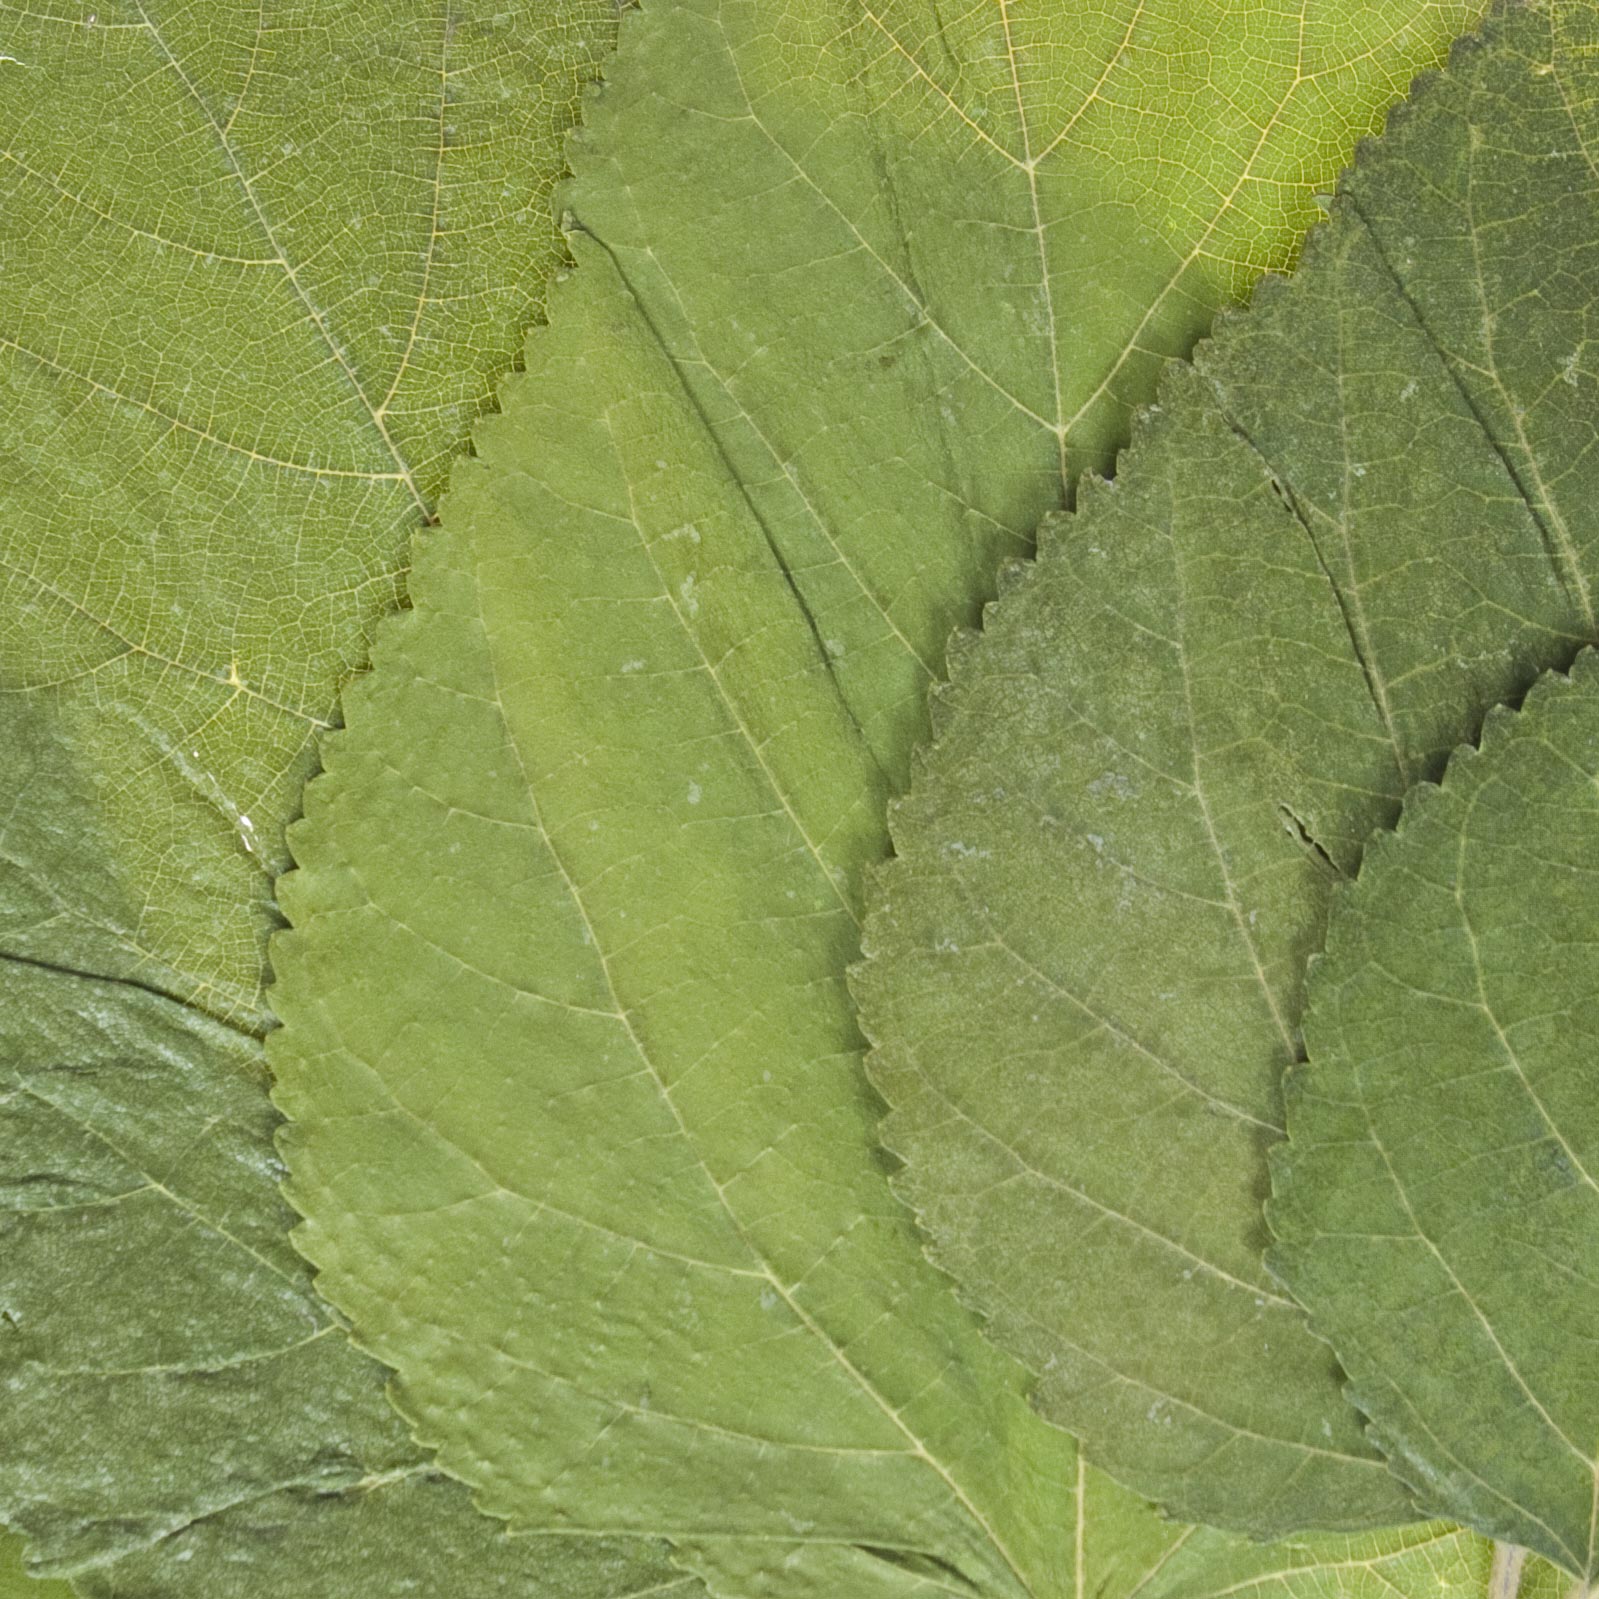 Mulberry leaves close-up